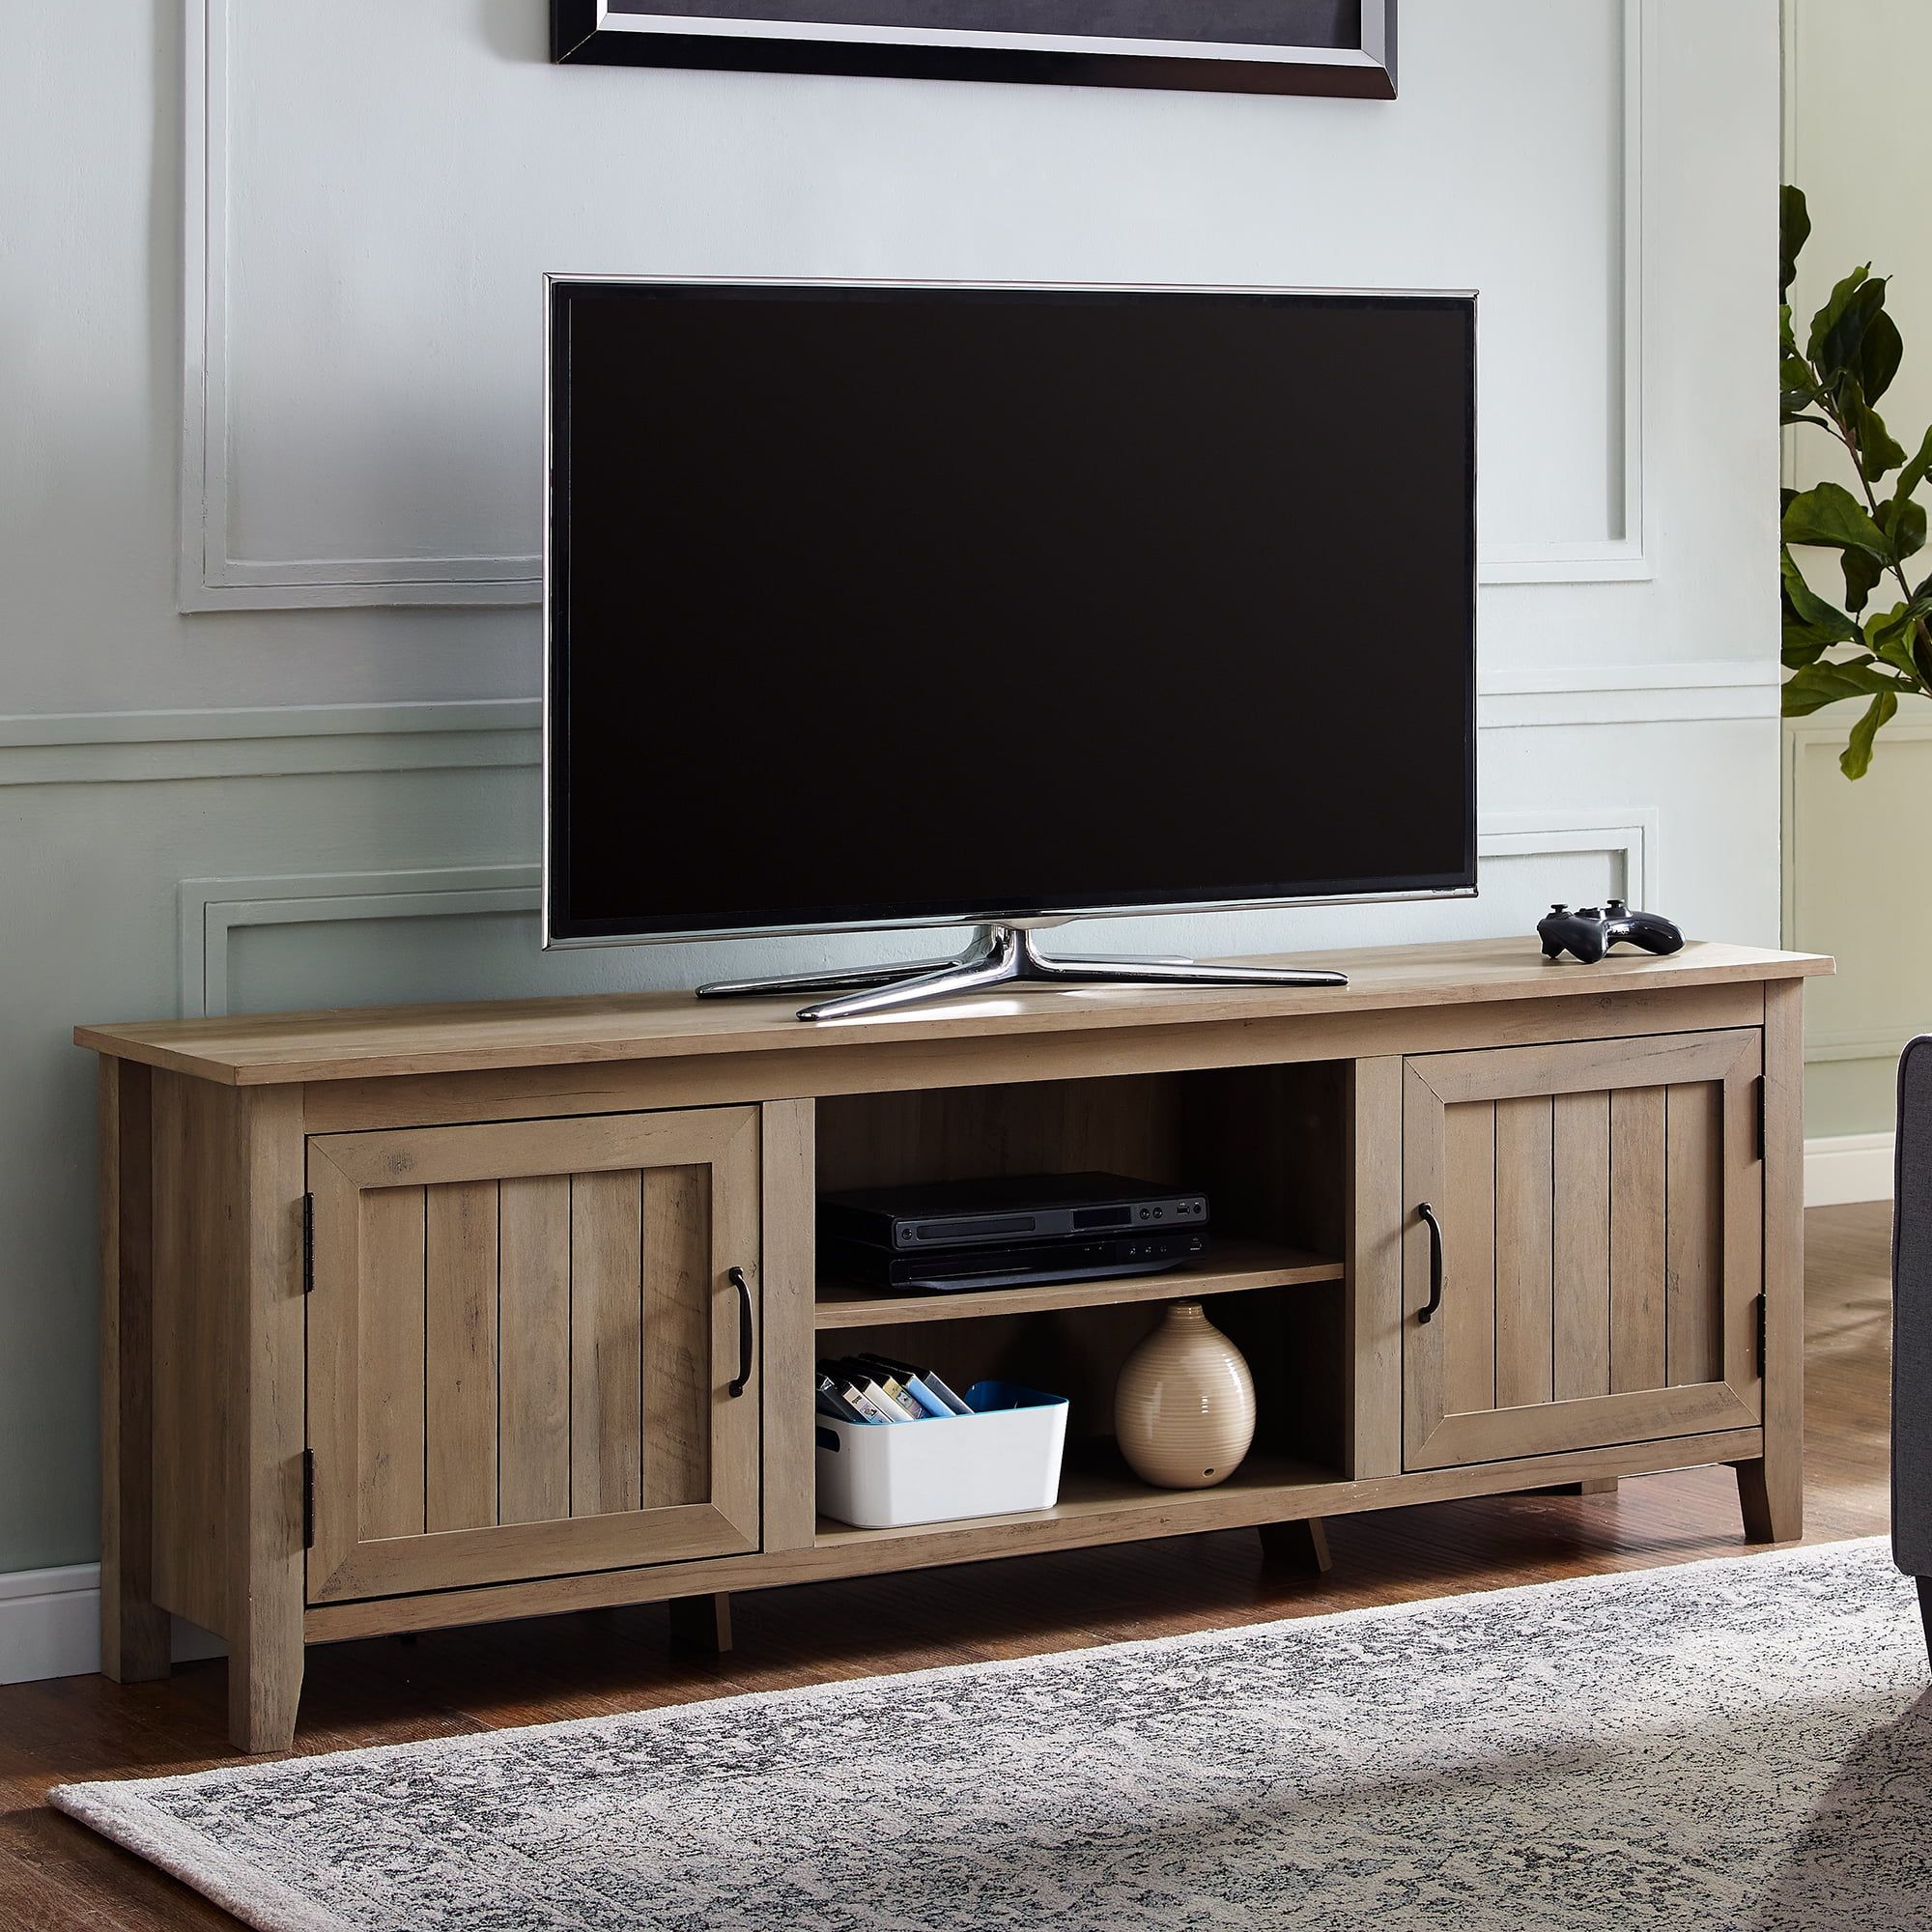 Manor Park Farmhouse Tv Stand For Tvs Up To 80", Reclaimed Barnwood Regarding Farmhouse Tv Stands (Gallery 6 of 20)